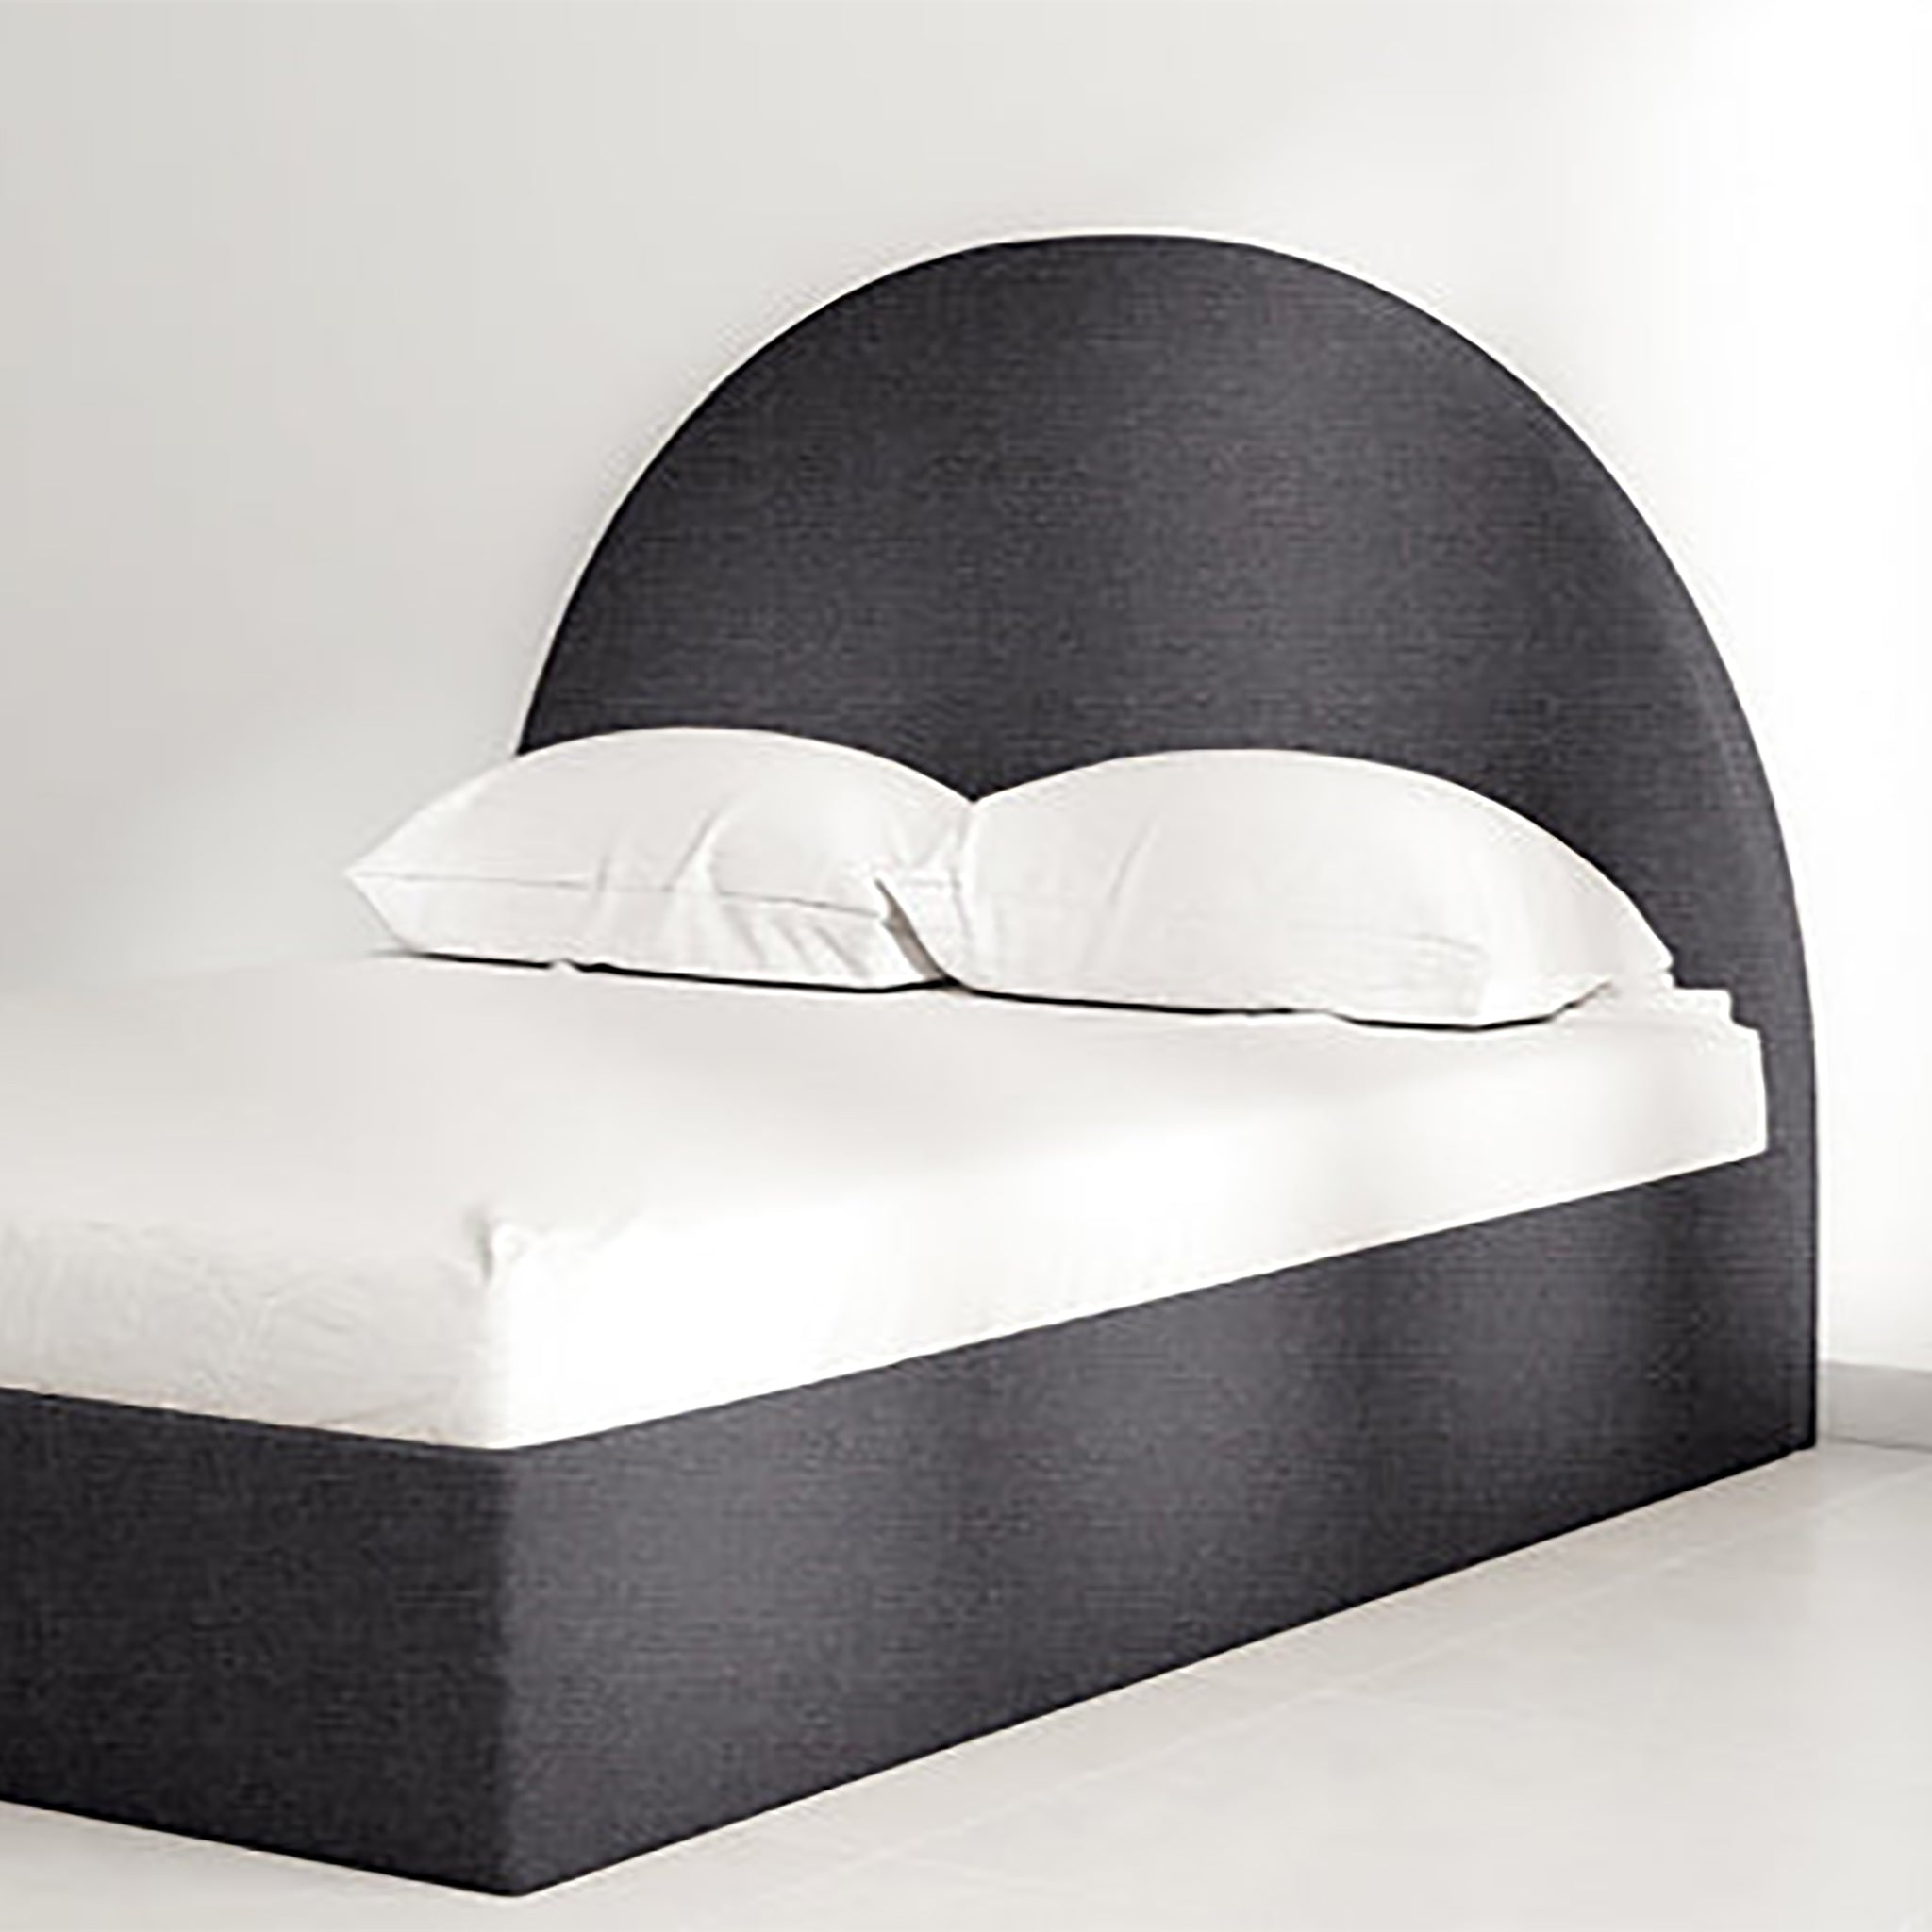 The Archie Bed featuring a luxurious curved headboard in high-quality dark upholstery. Perfect for modern living spaces with narrow and compact design, ideal for master bedrooms and guest rooms. Elegant and space-saving furniture for contemporary homes.